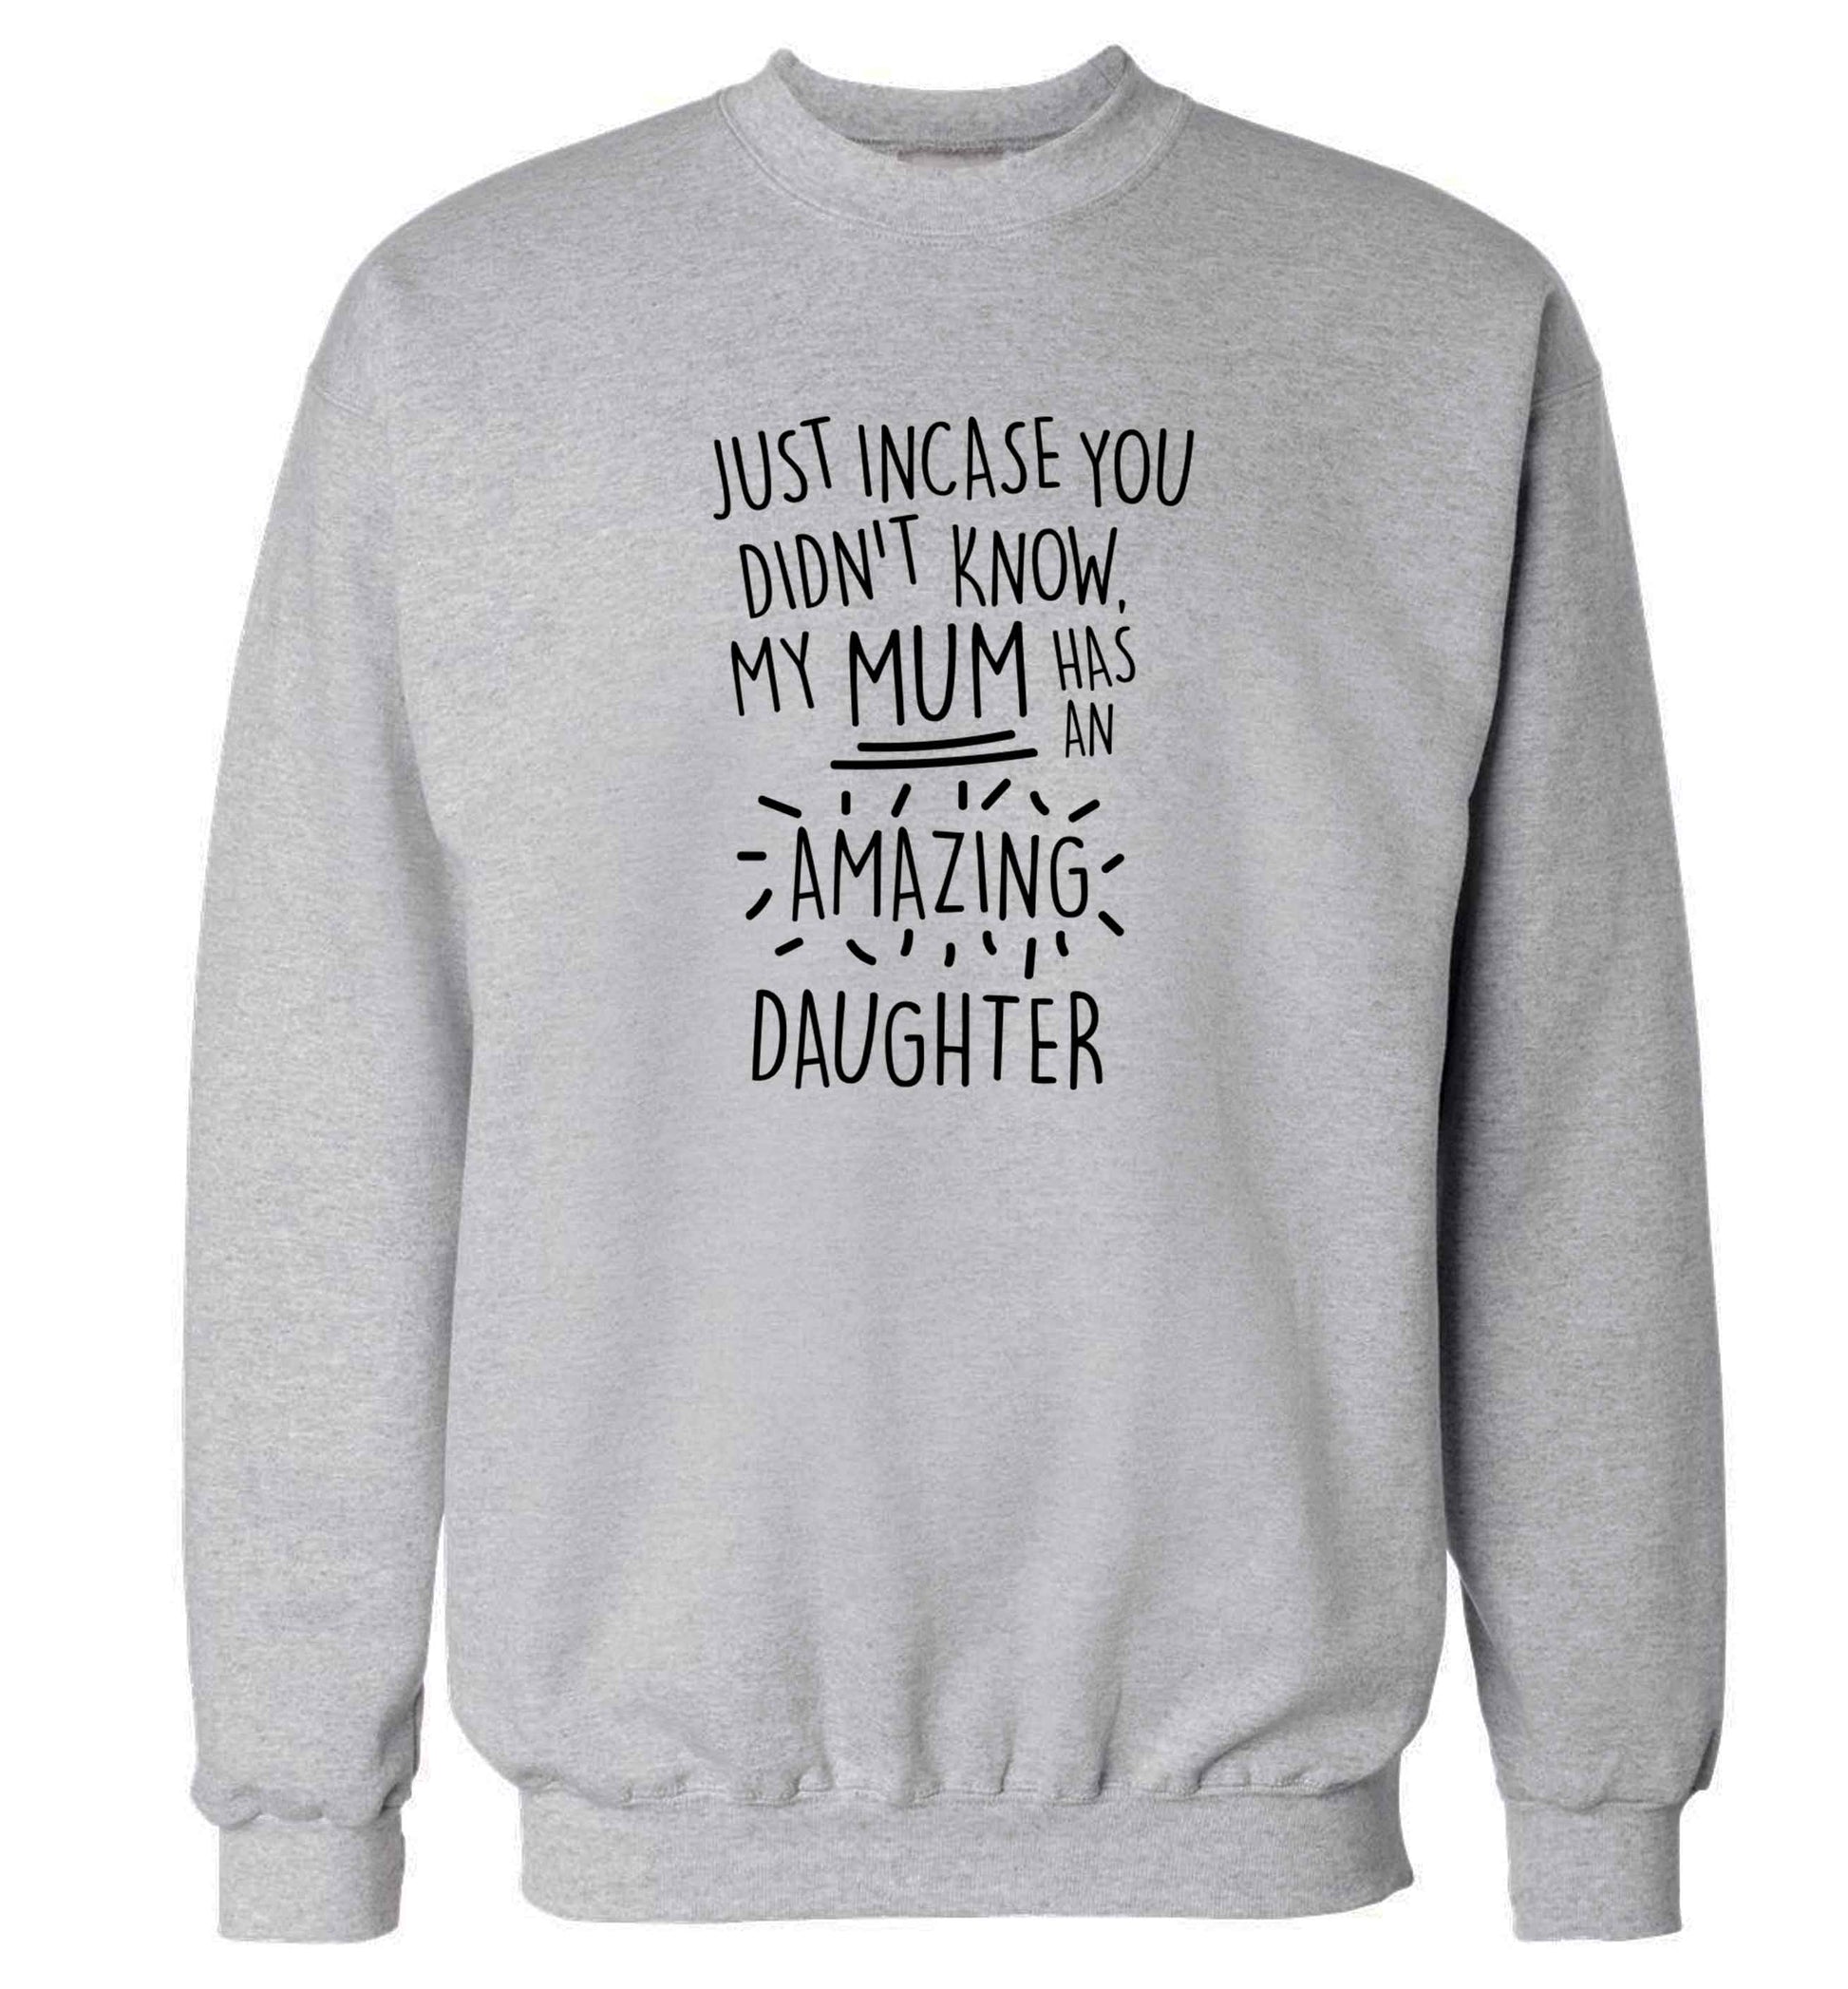 Just incase you didn't know my mum has an amazing daughter adult's unisex grey sweater 2XL